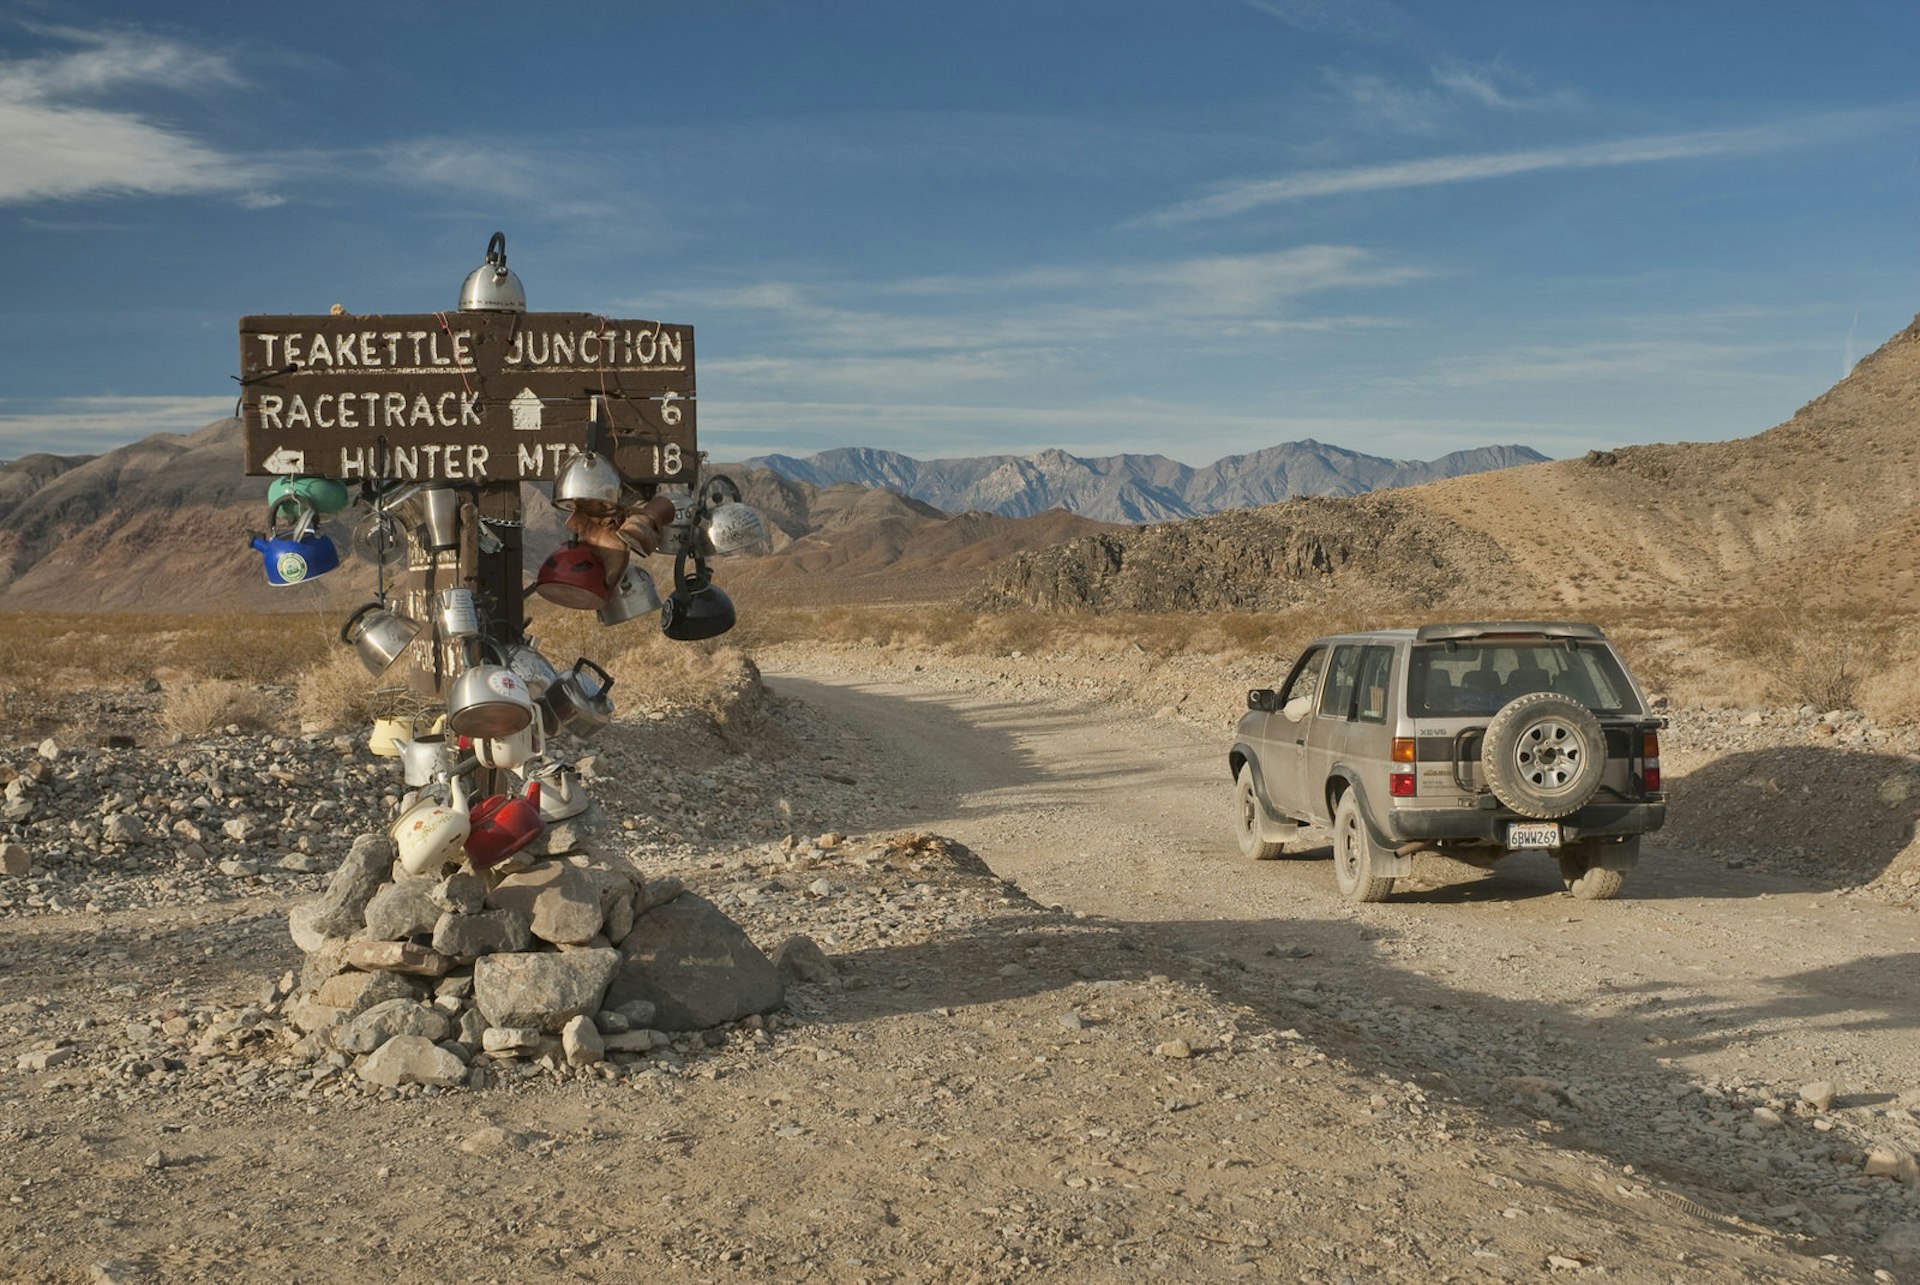 A jeep drives past Teakettle Junction in Death Valley National Park, California, USA © Witold Skrypczak / Getty Images